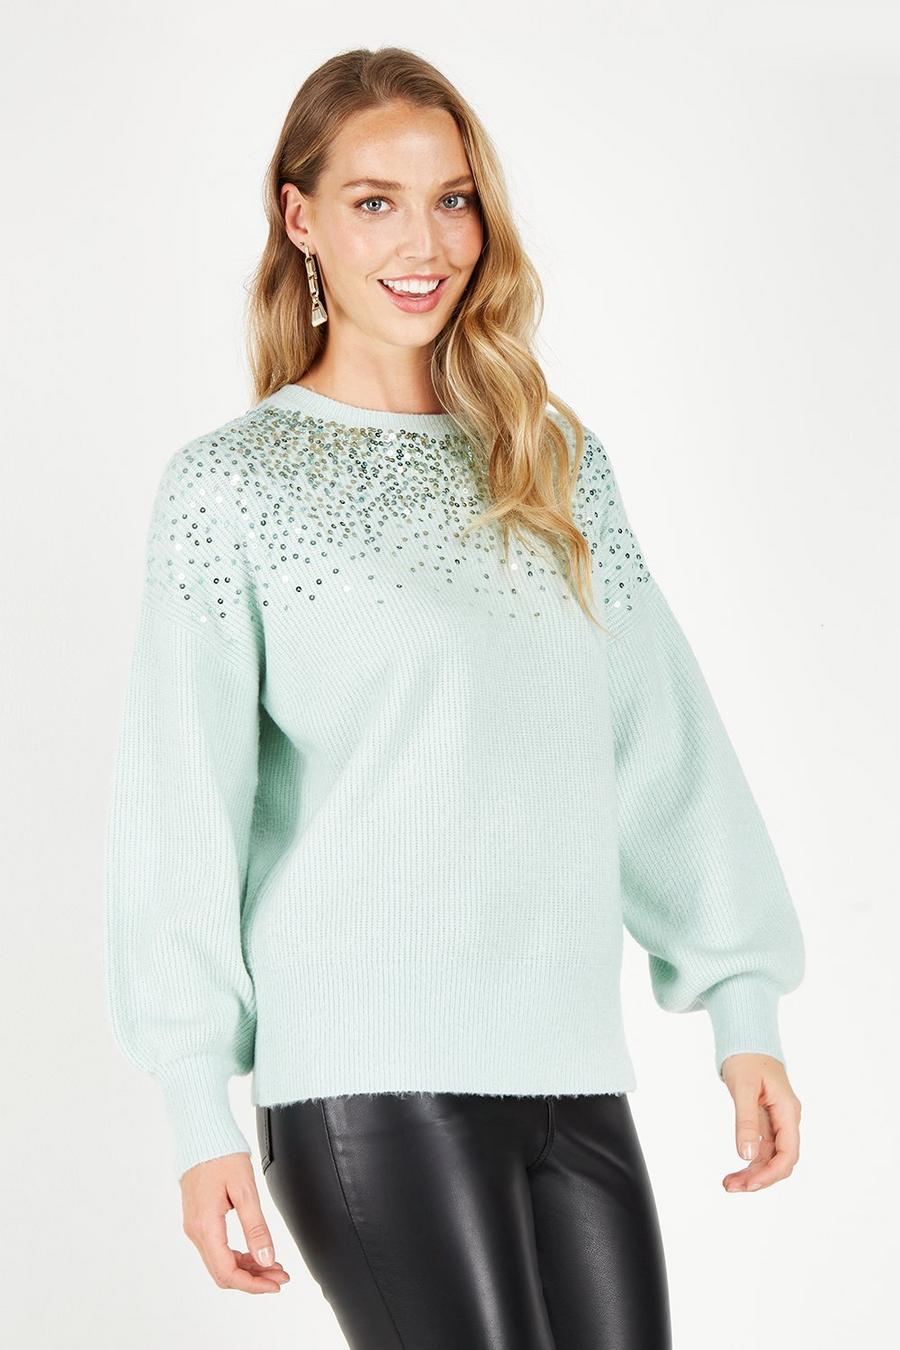 Scatter Sequin Chunky Knit Jumper